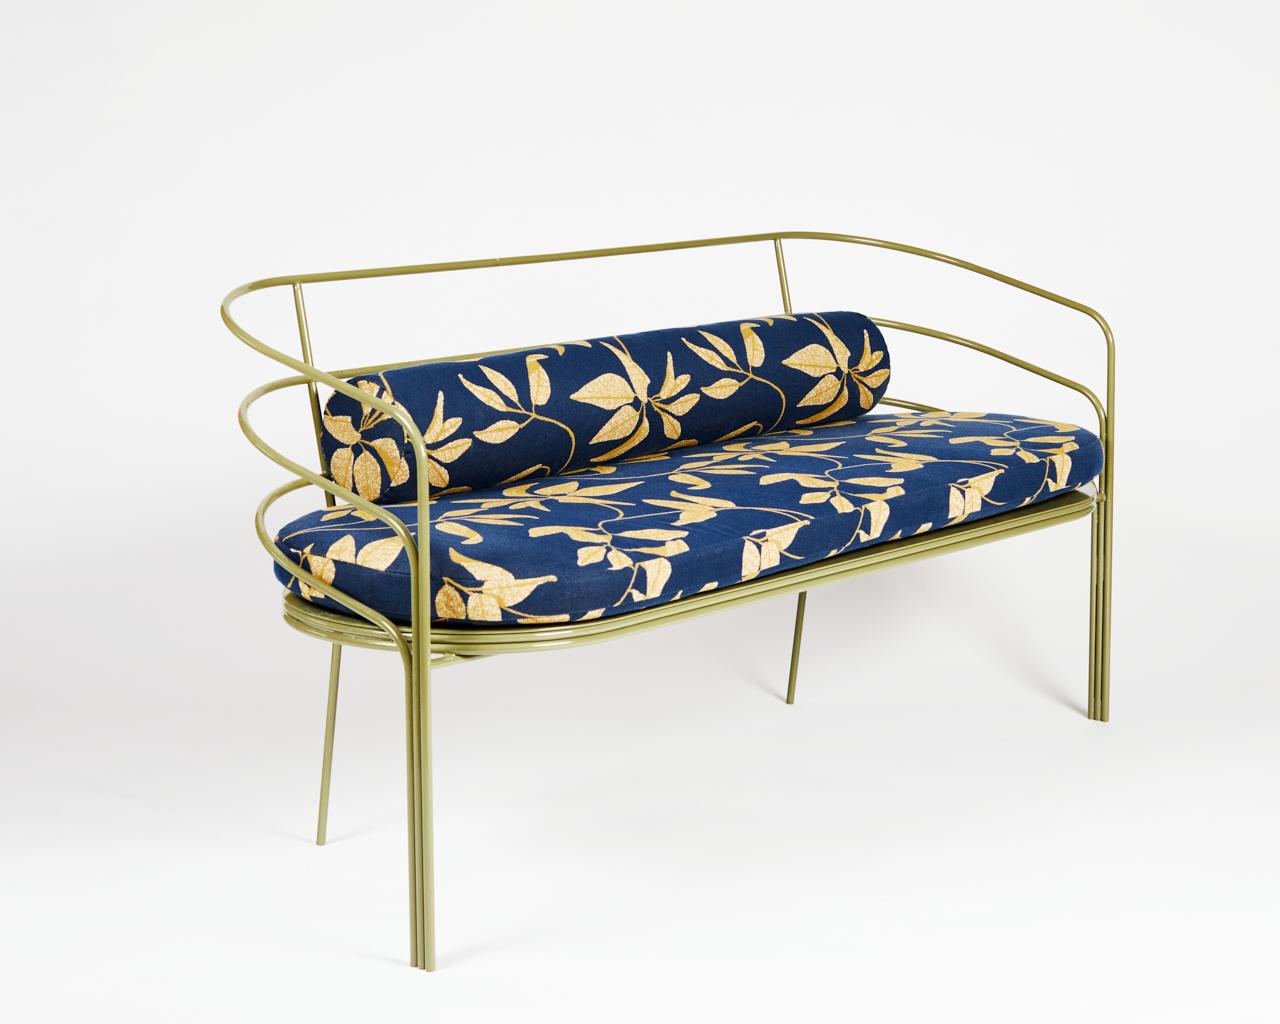 DeMille is ready for her close up! Inspired by the streamline moderne architecture found on the east side of Los Angeles, the DeMille sofa hearkens back to LA’s Hollywood Regency era. This piece is suitable for indoor or outdoor use. The frame is